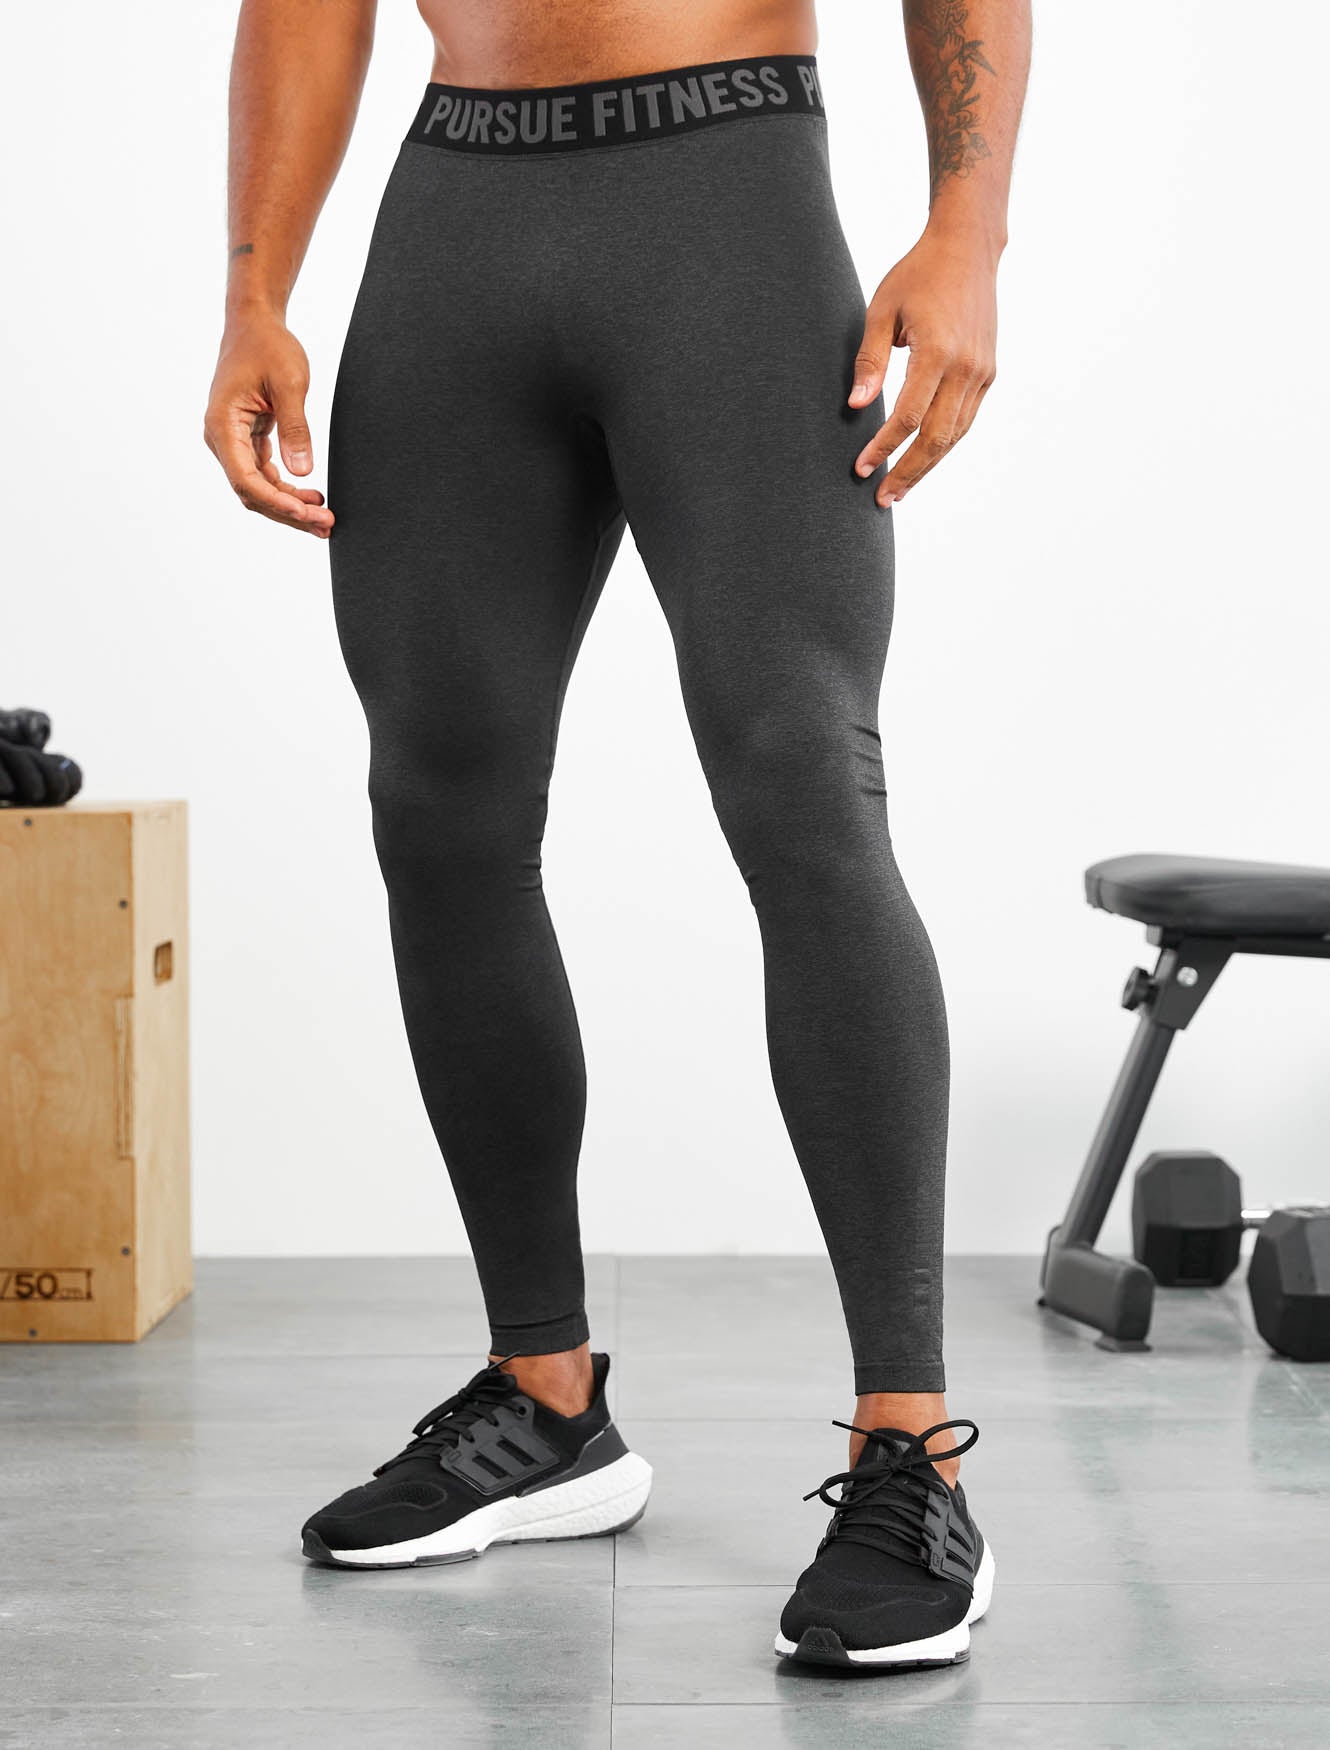 Gymshark Everyday Seamless Tight Fit Tee - Black